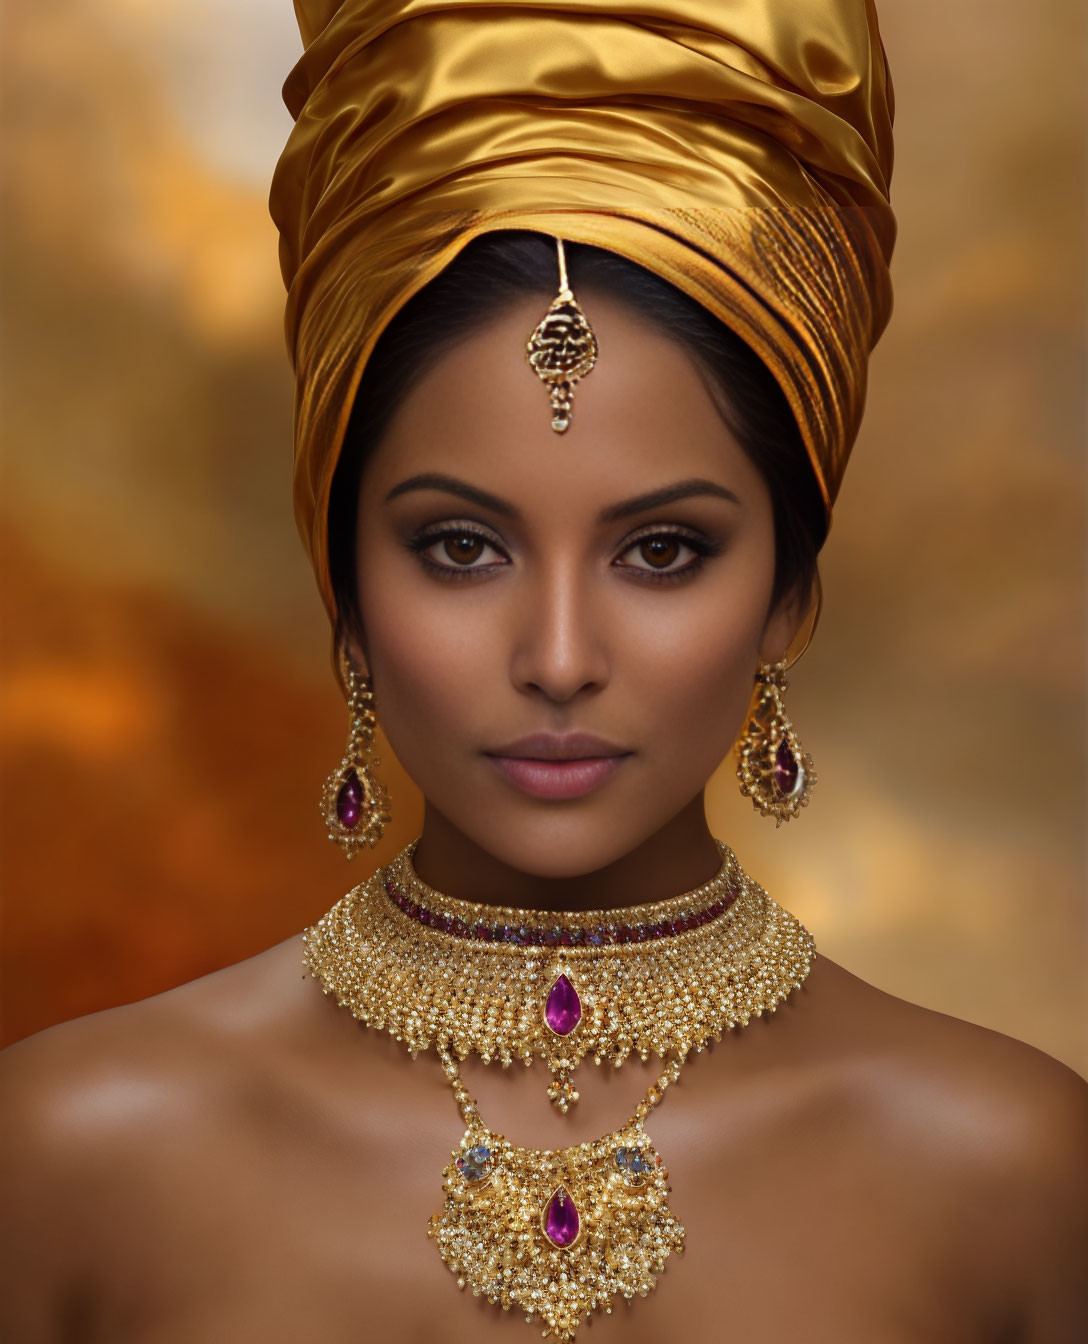 Woman adorned with gold jewelry and purple gemstones in elaborate makeup.